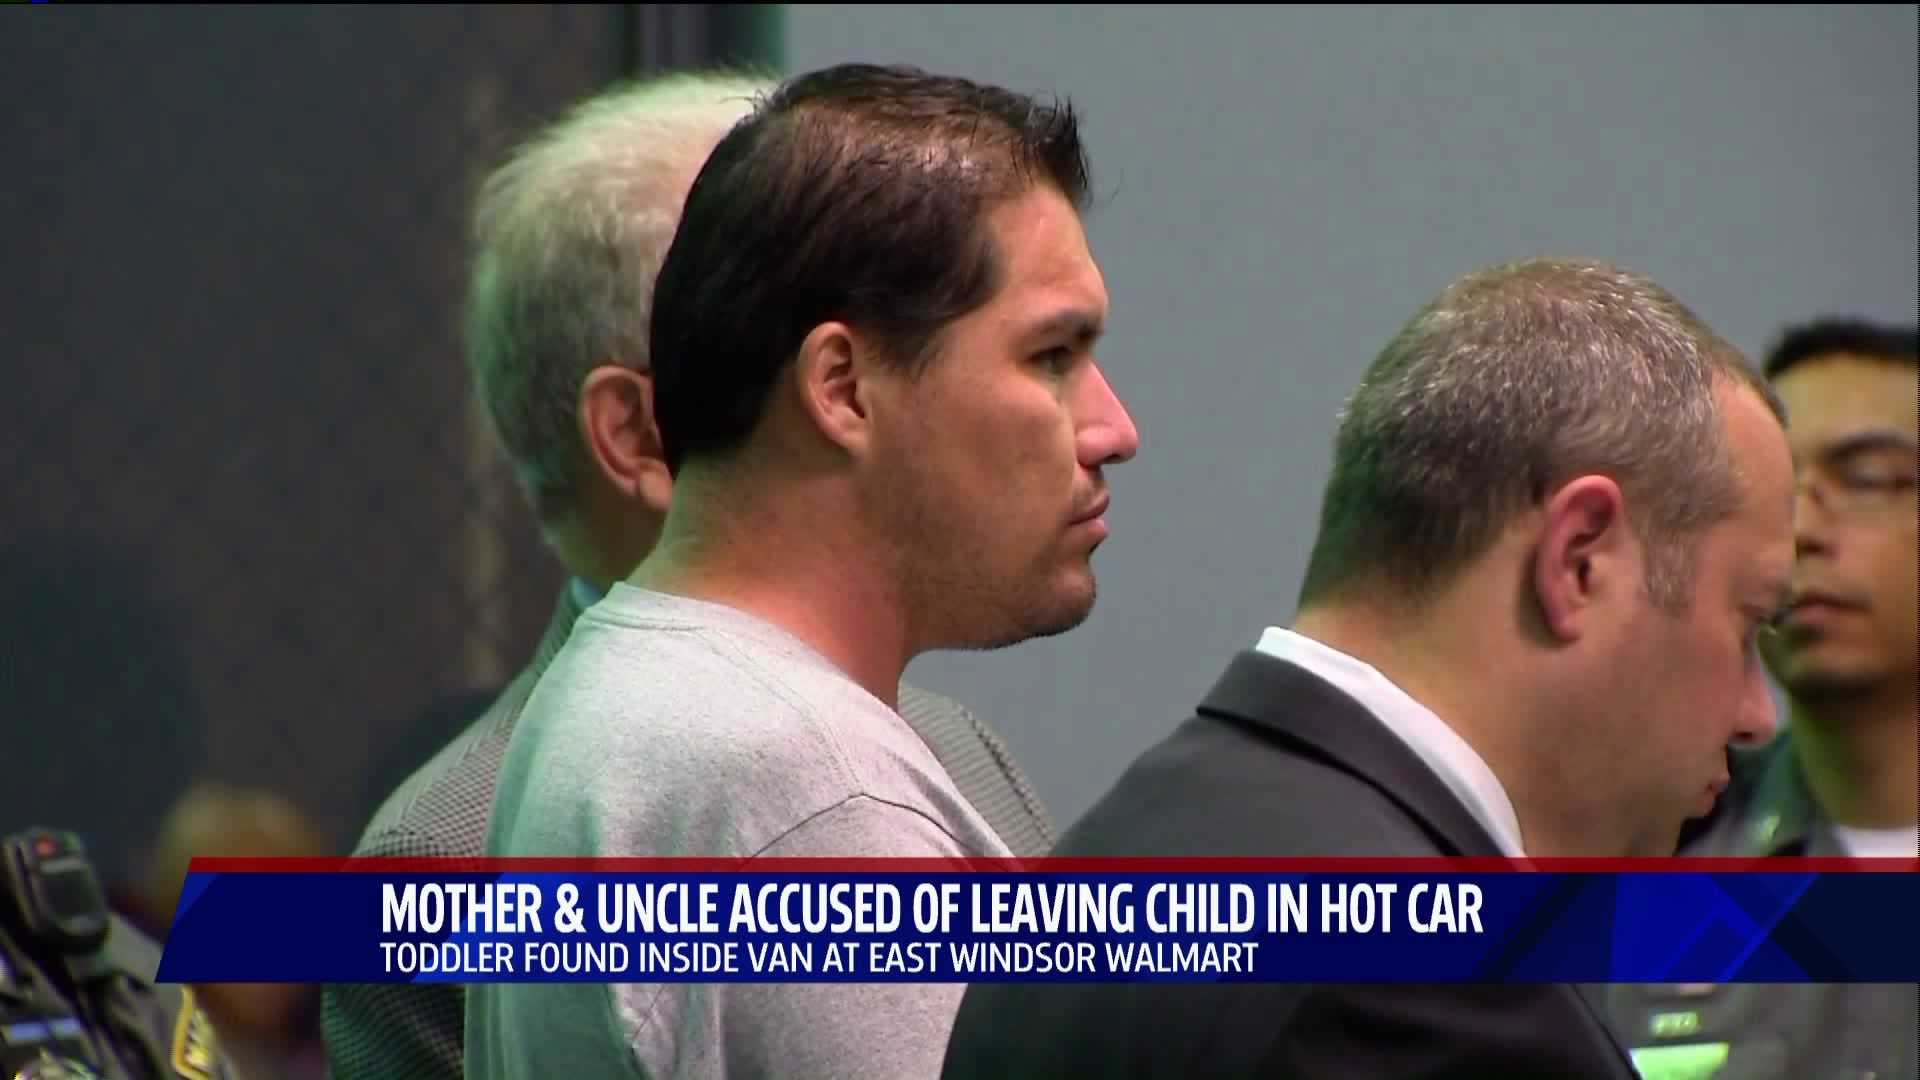 Mother and uncle accused of leaving child in car